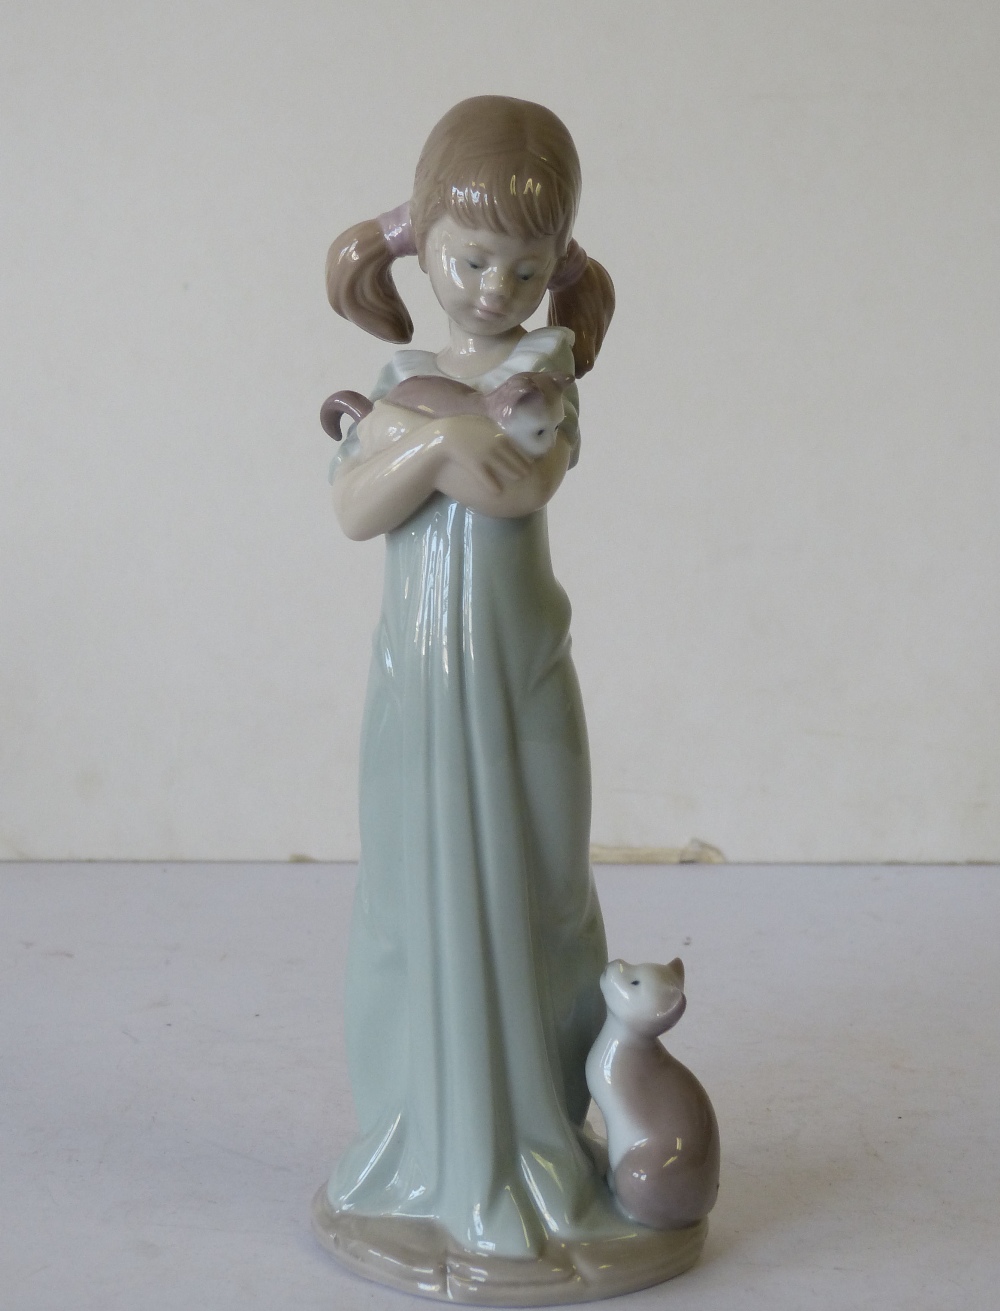 A Lladro Figure of a young girl holding a kitten with a cat at her feet, 21cm high